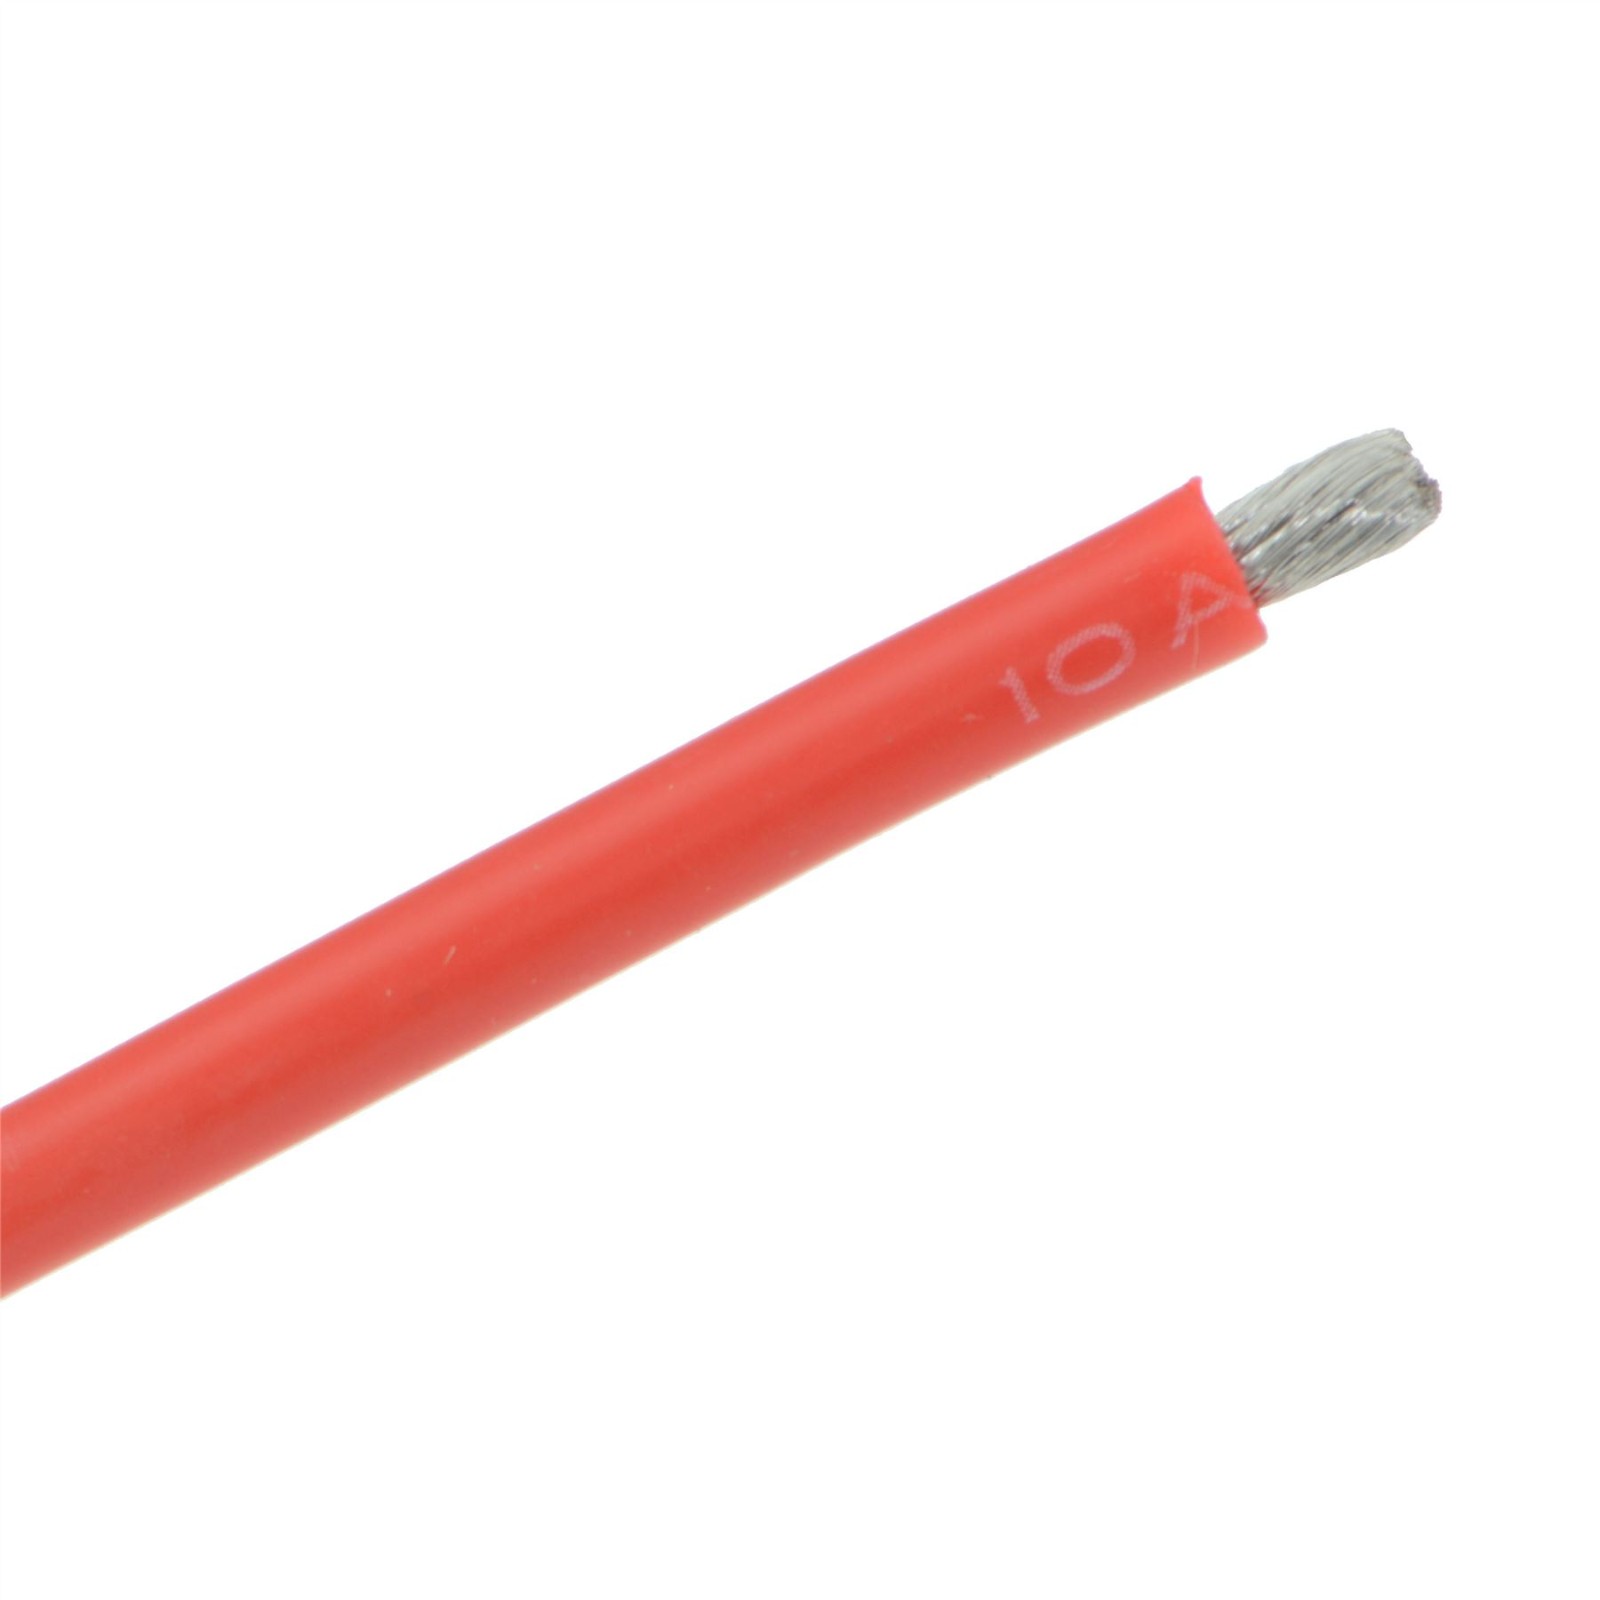 DANIU-5-Meter-Red-Silicone-Wire-Cable-10121416182022AWG-Flexible-Cable-1170292-5